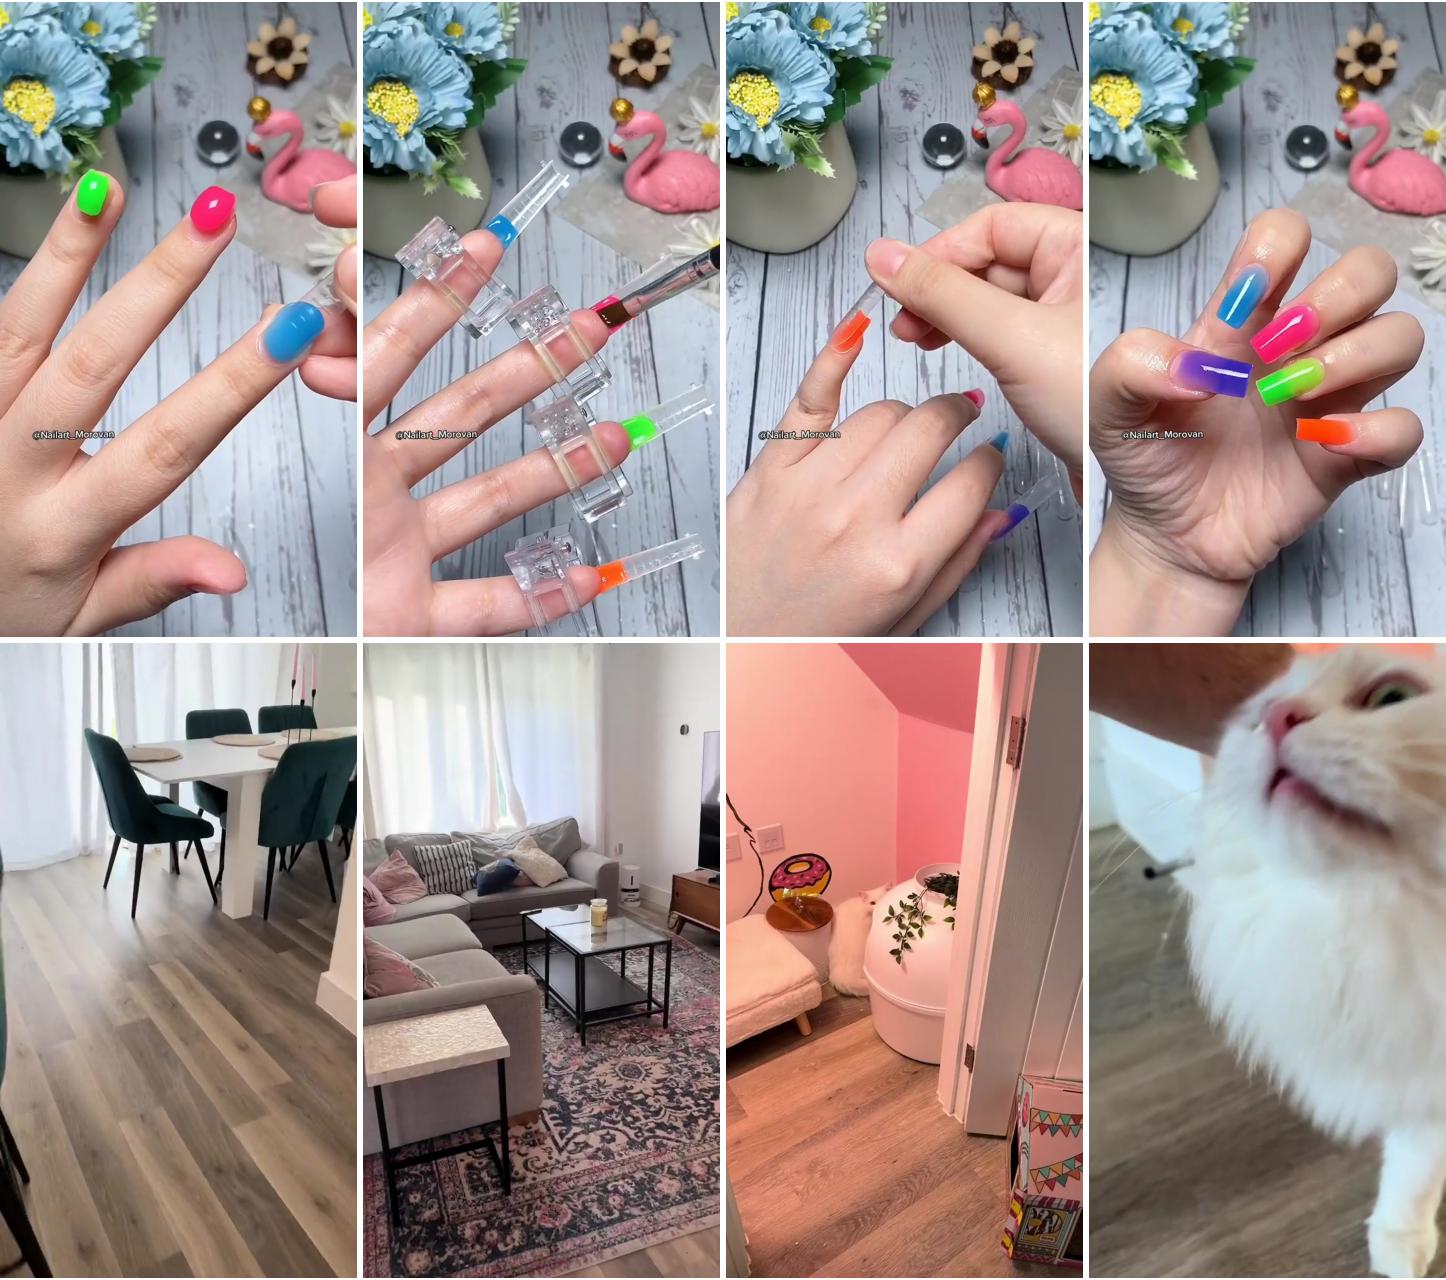 Full hand color poly gel extension,, dopamine girl; kitty so excited to see her meowmy